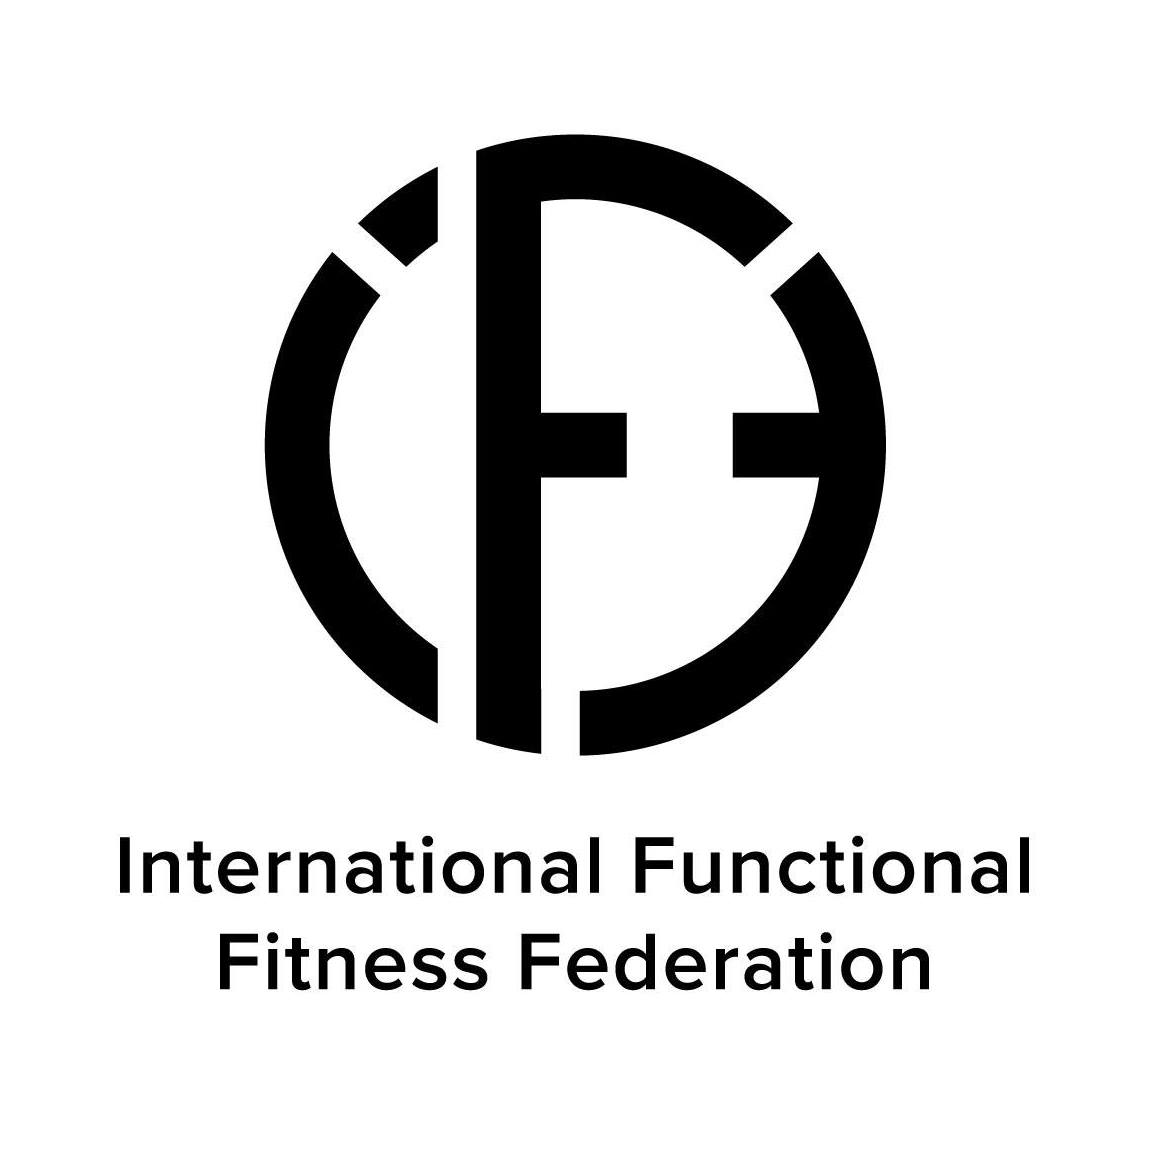 International Functional Fitness Federation (iF3)